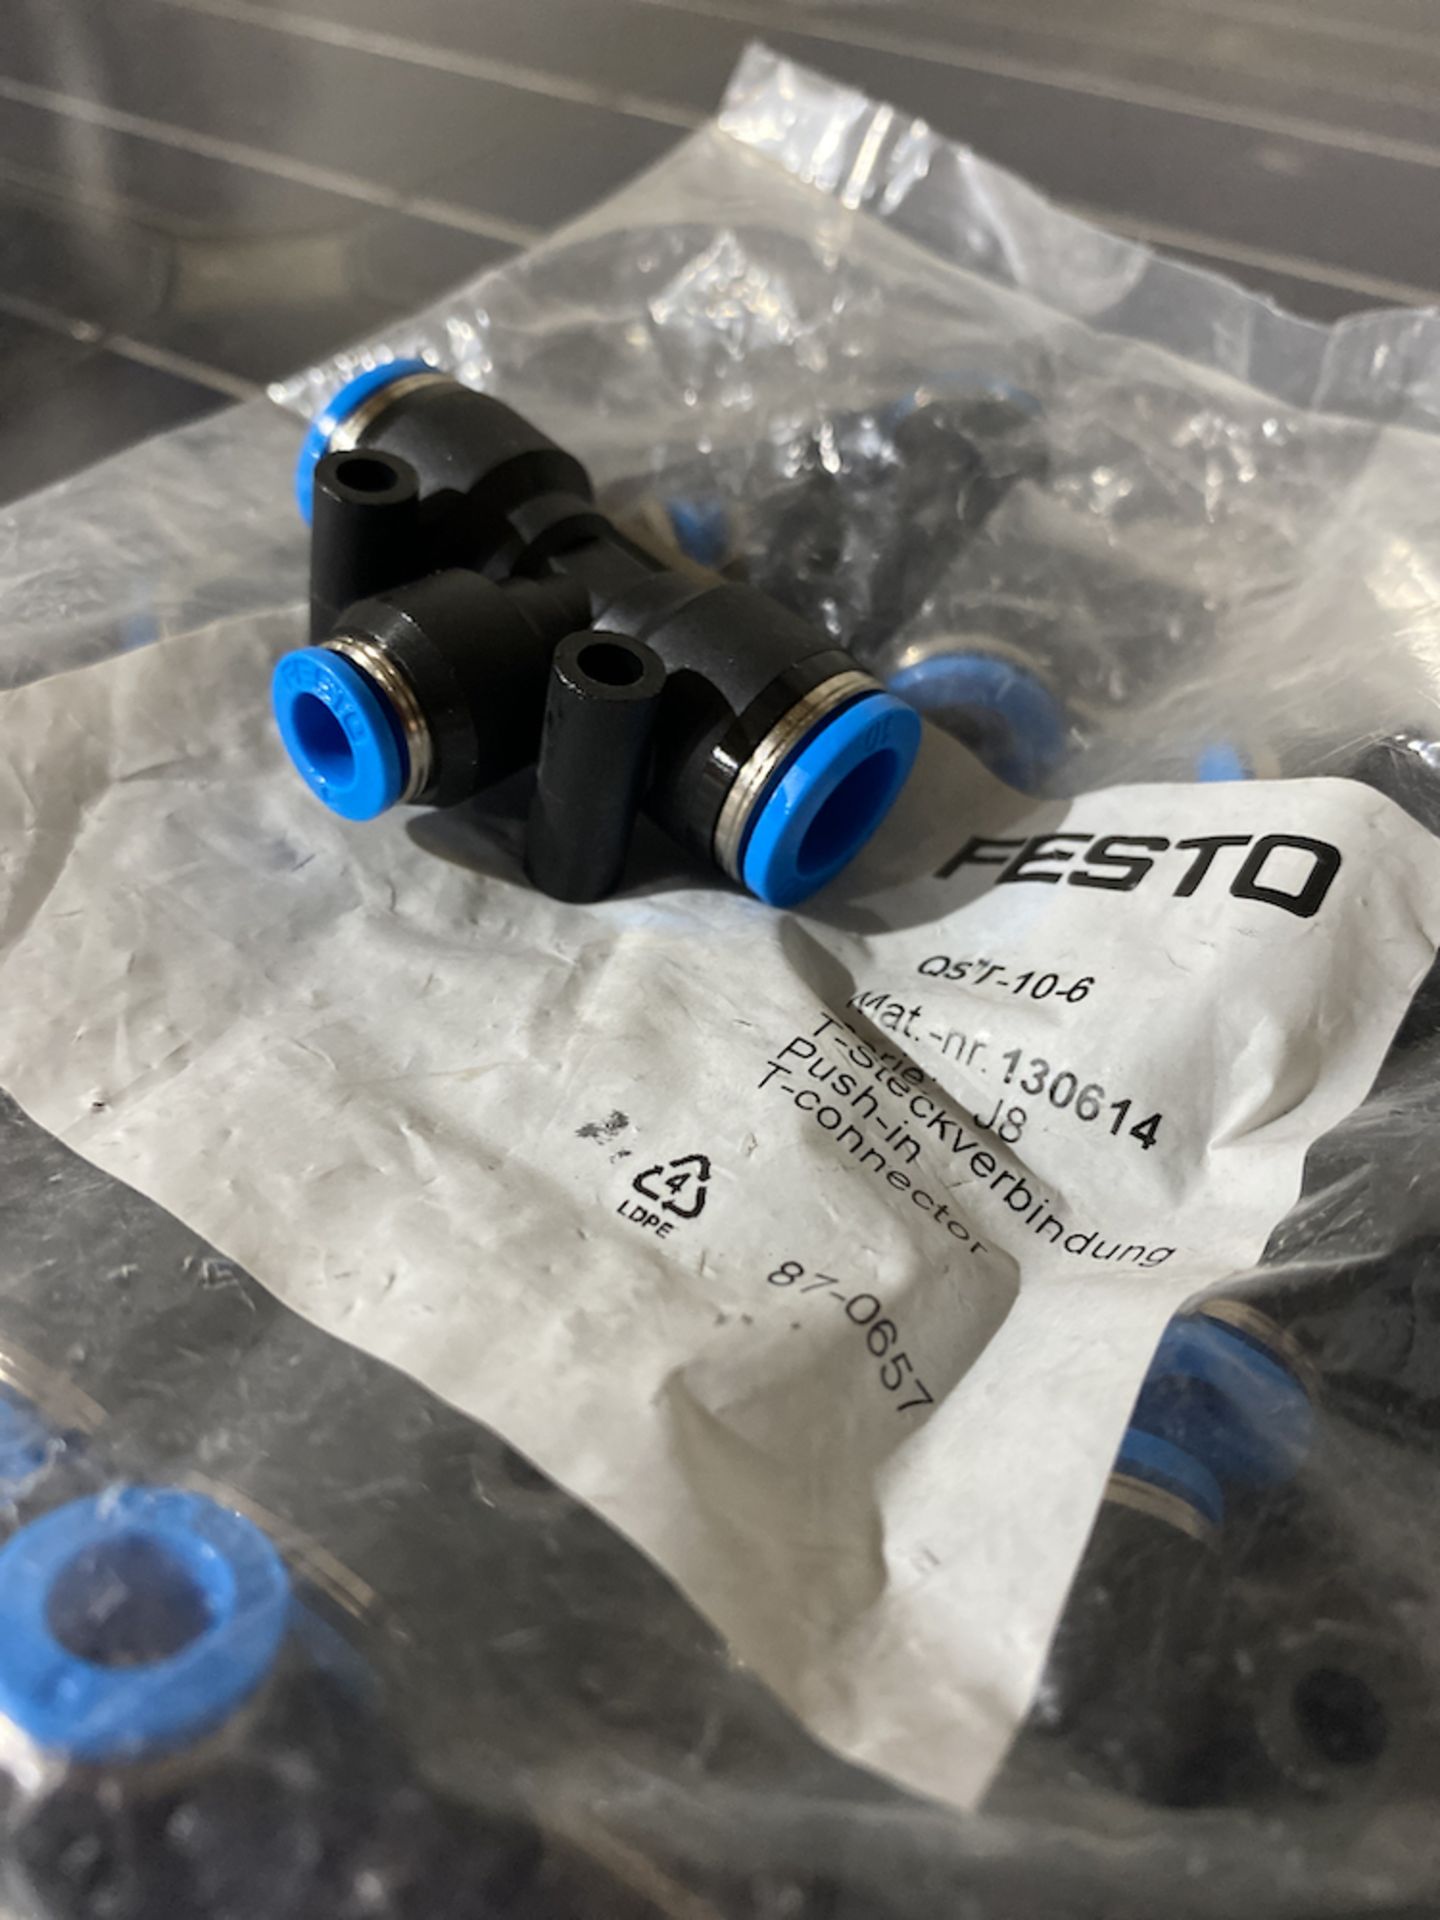 LOT OF 20 NEW FESTO QST-10-6 10MM TO 6MM PUSH FIT T-CONNECTORS - Image 2 of 3